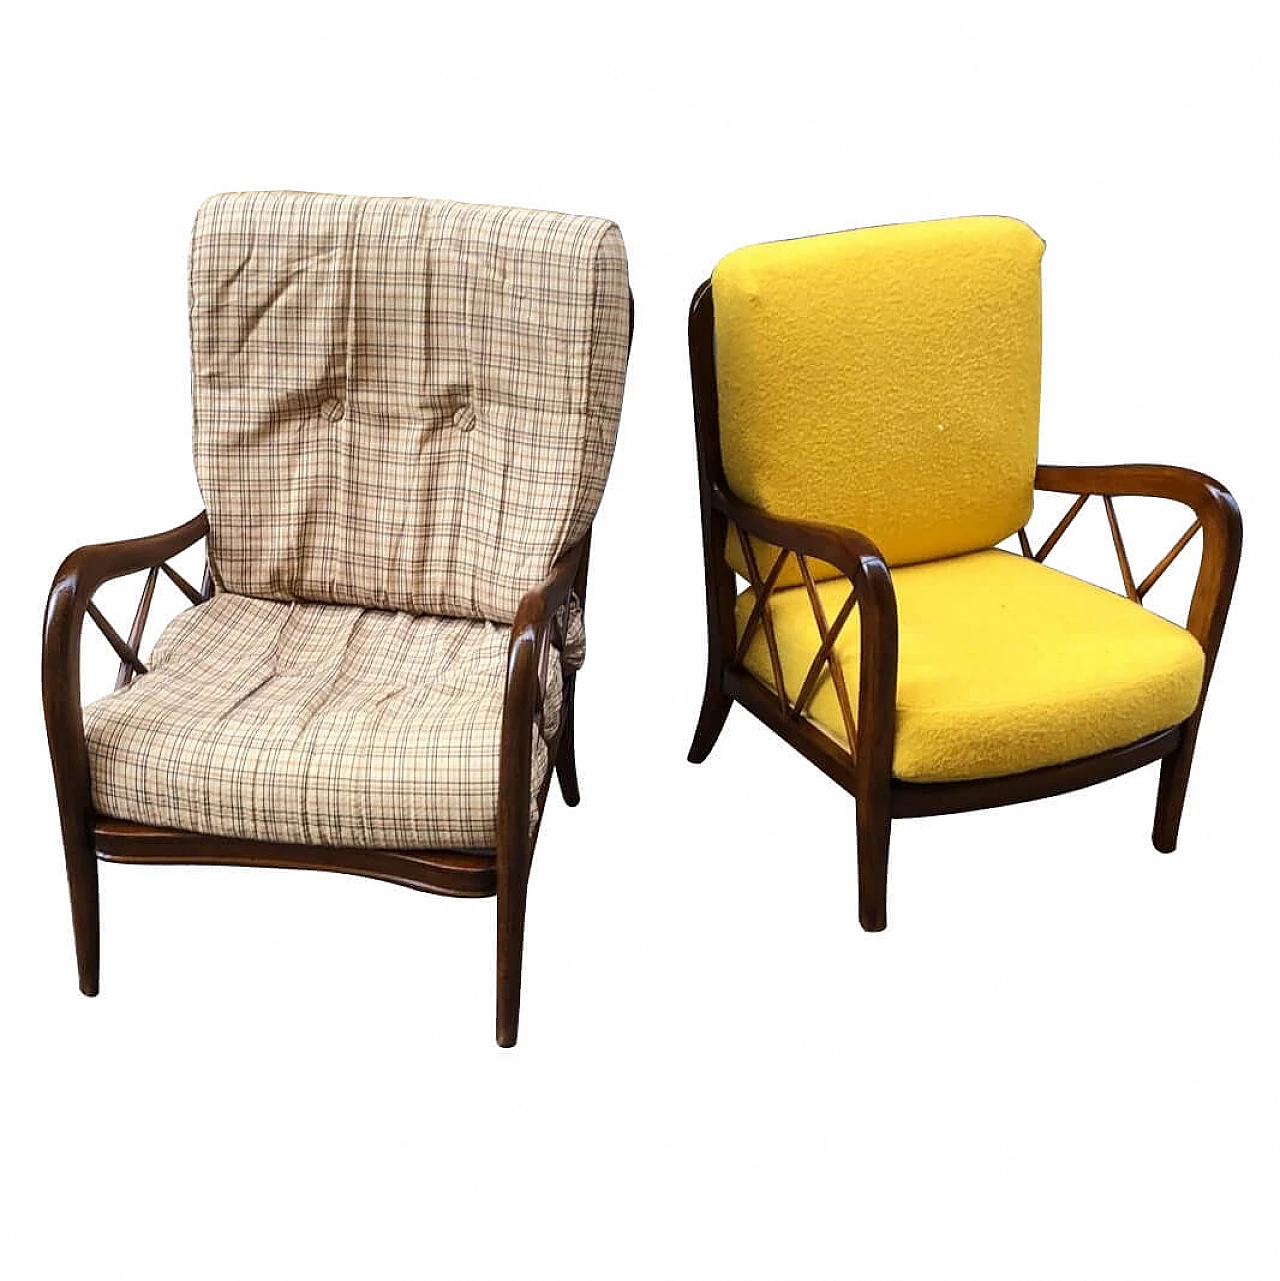 Two similar armchairs by Paolo Buffa, 1950s 1260246